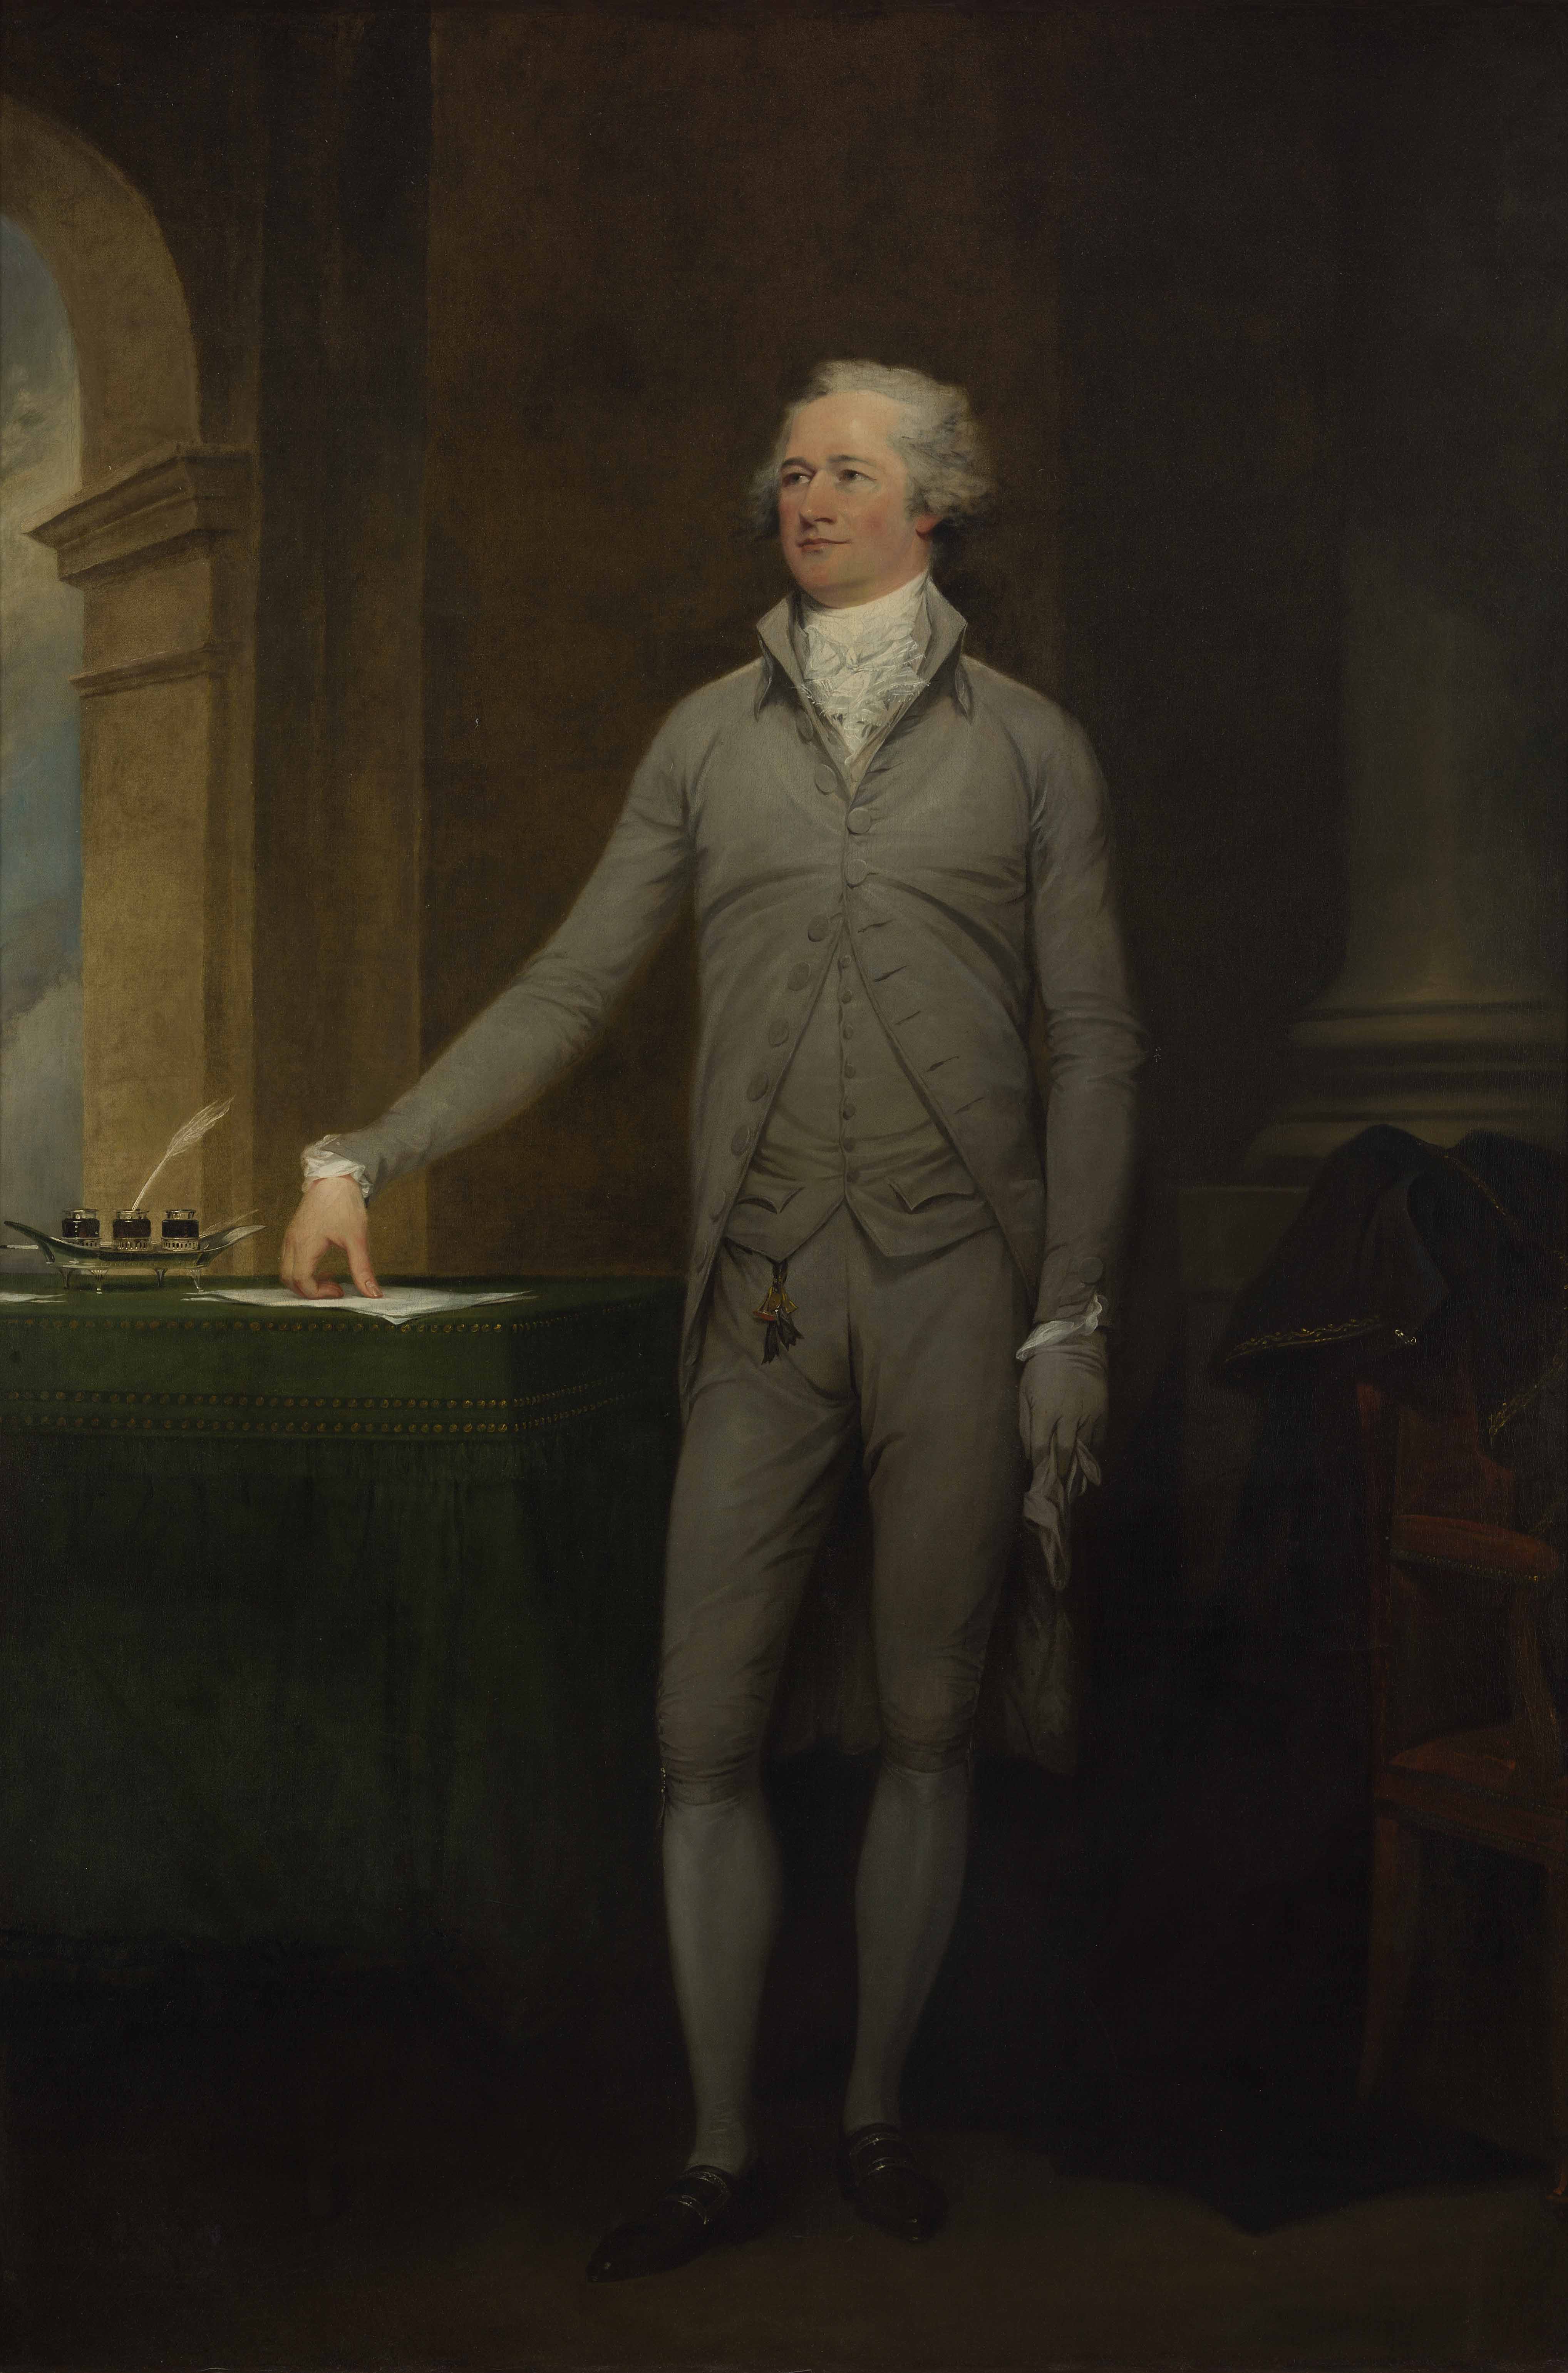  John Trumbull, ‘Portrait of Alexander Hamilton,’ 1792, oil on canvas, 102 by 73 by 5 1/2in. Jointly Owned by Crystal Bridges Museum of American Art and the Metropolitan Museum of Art, gift of Credit Suisse, 2013.4. Photography by Edward C. Robison III. 